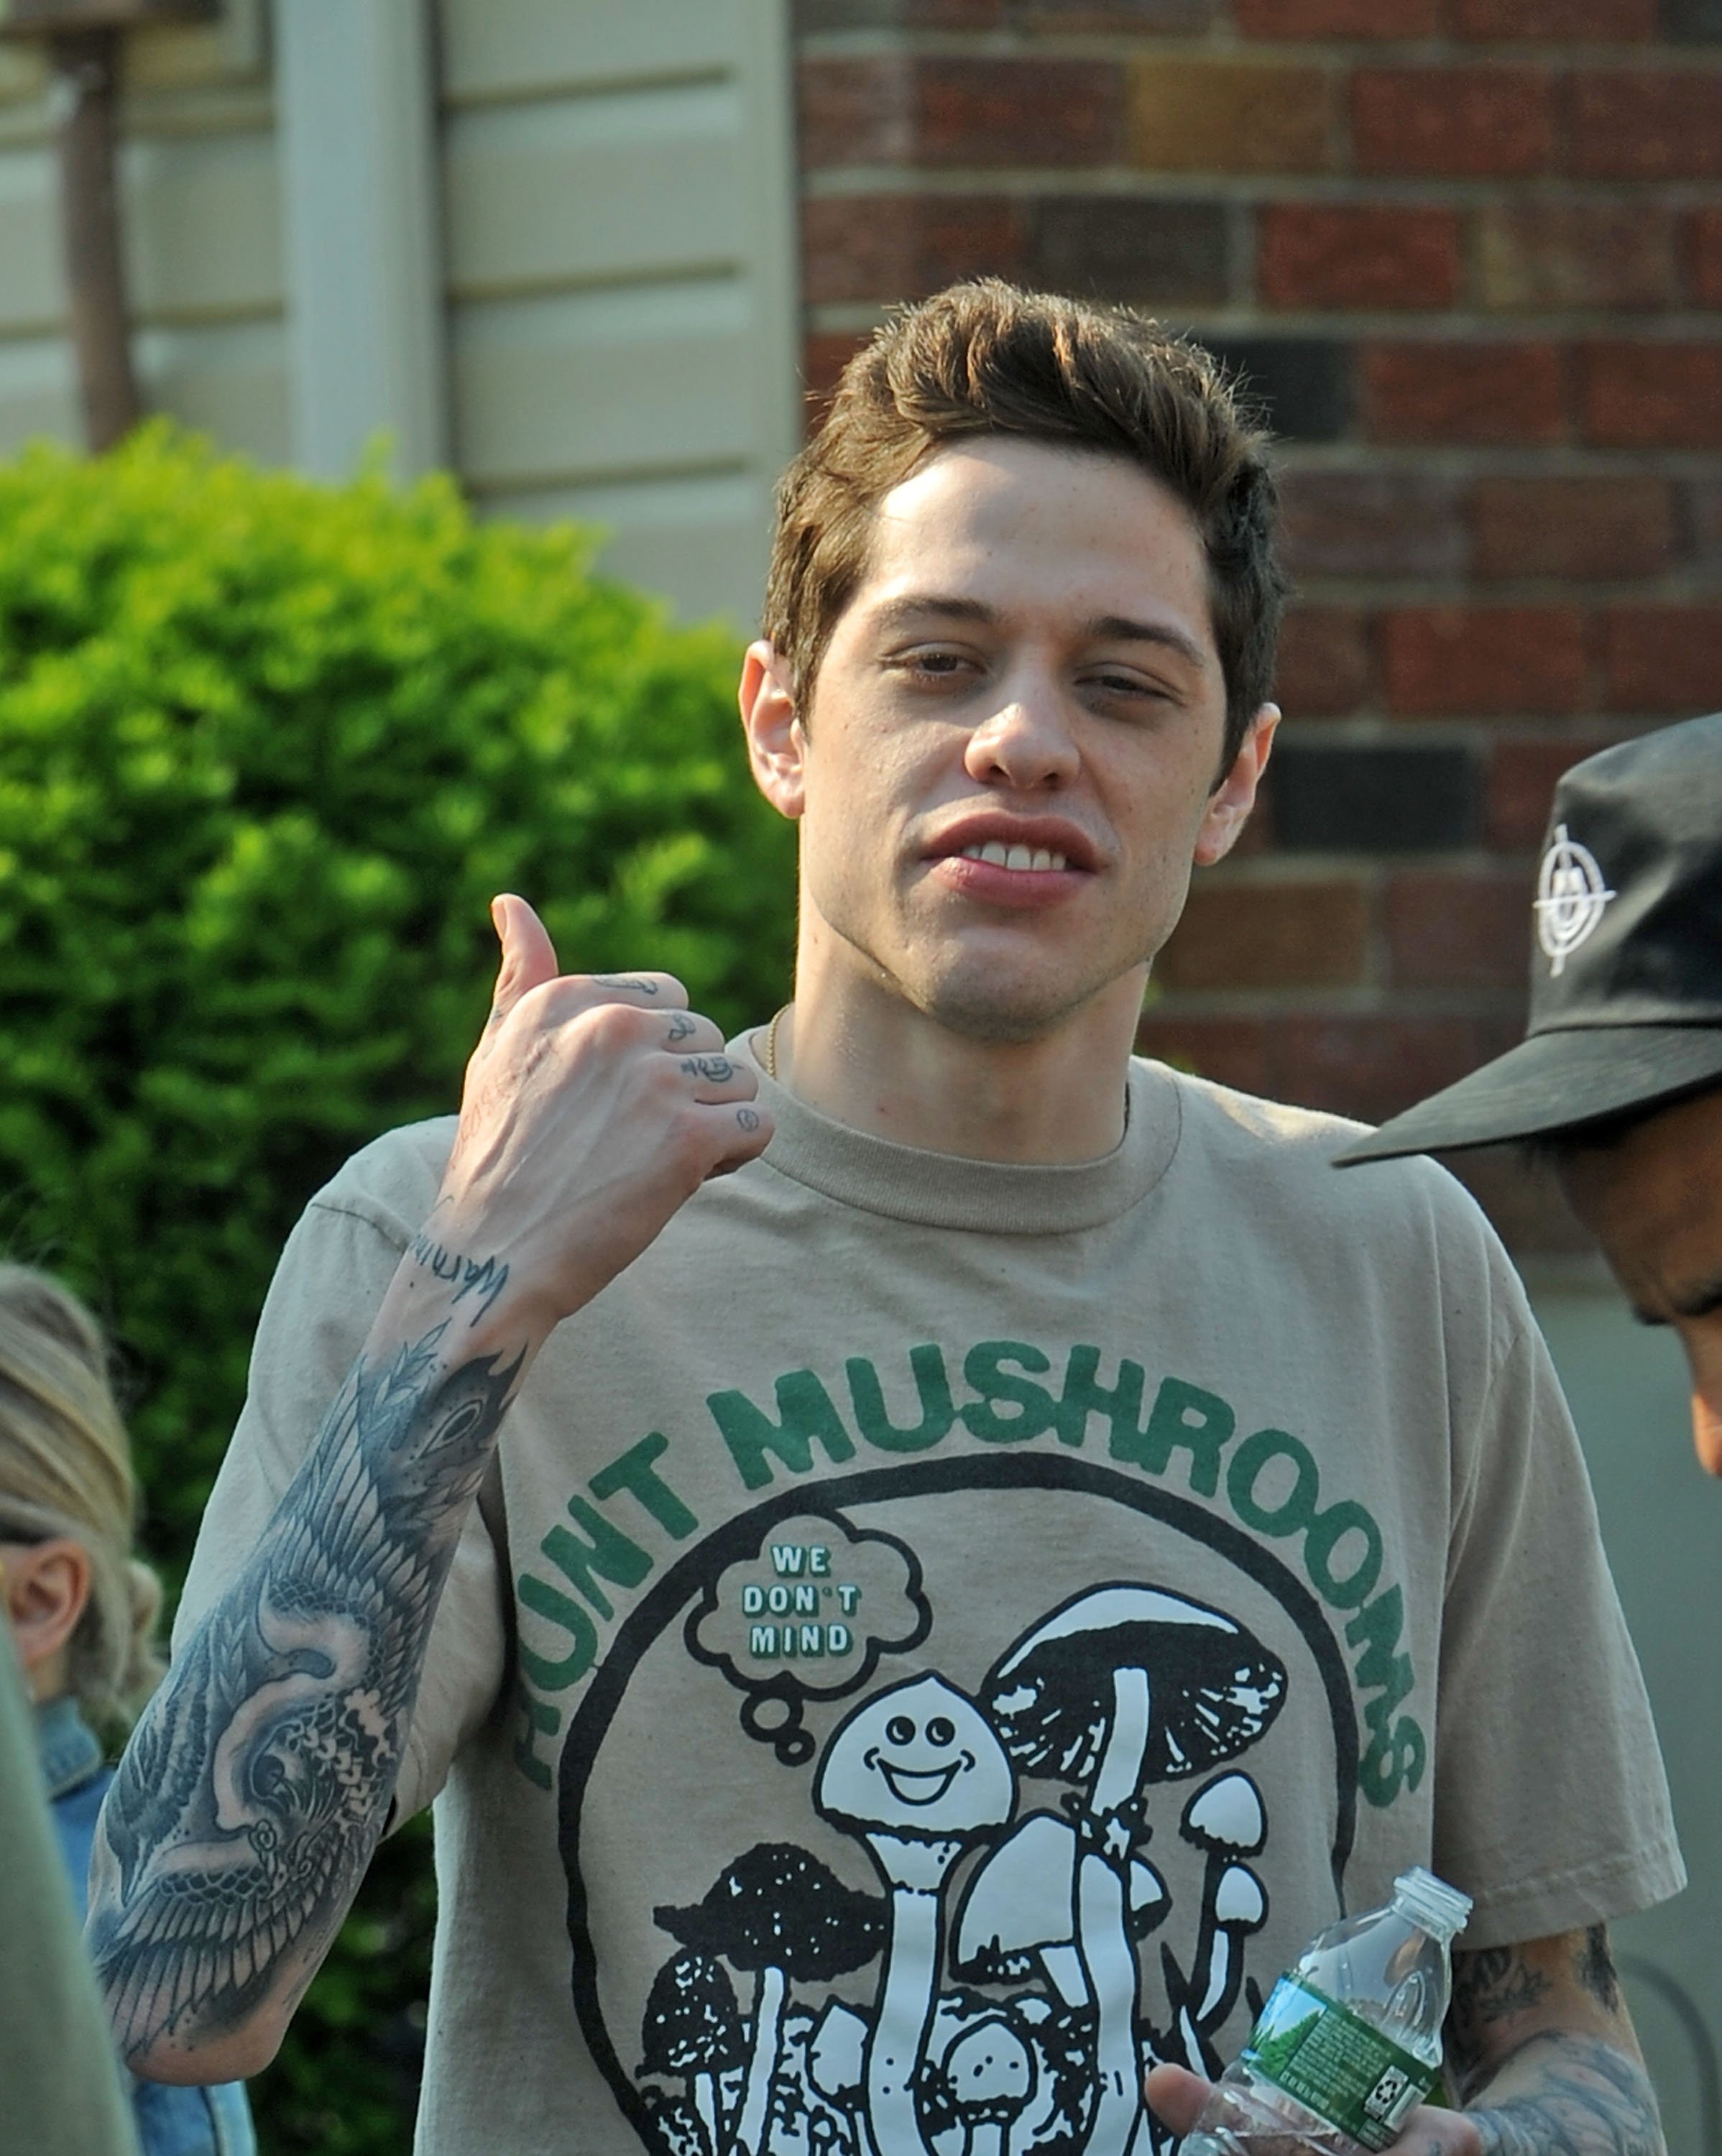 Pete Davidson on set for "Untitled Judd Apatow / Pete Davidson Project" aka "Staten Island" on June 3, 2019 in New York City.  |  Source: Getty Images